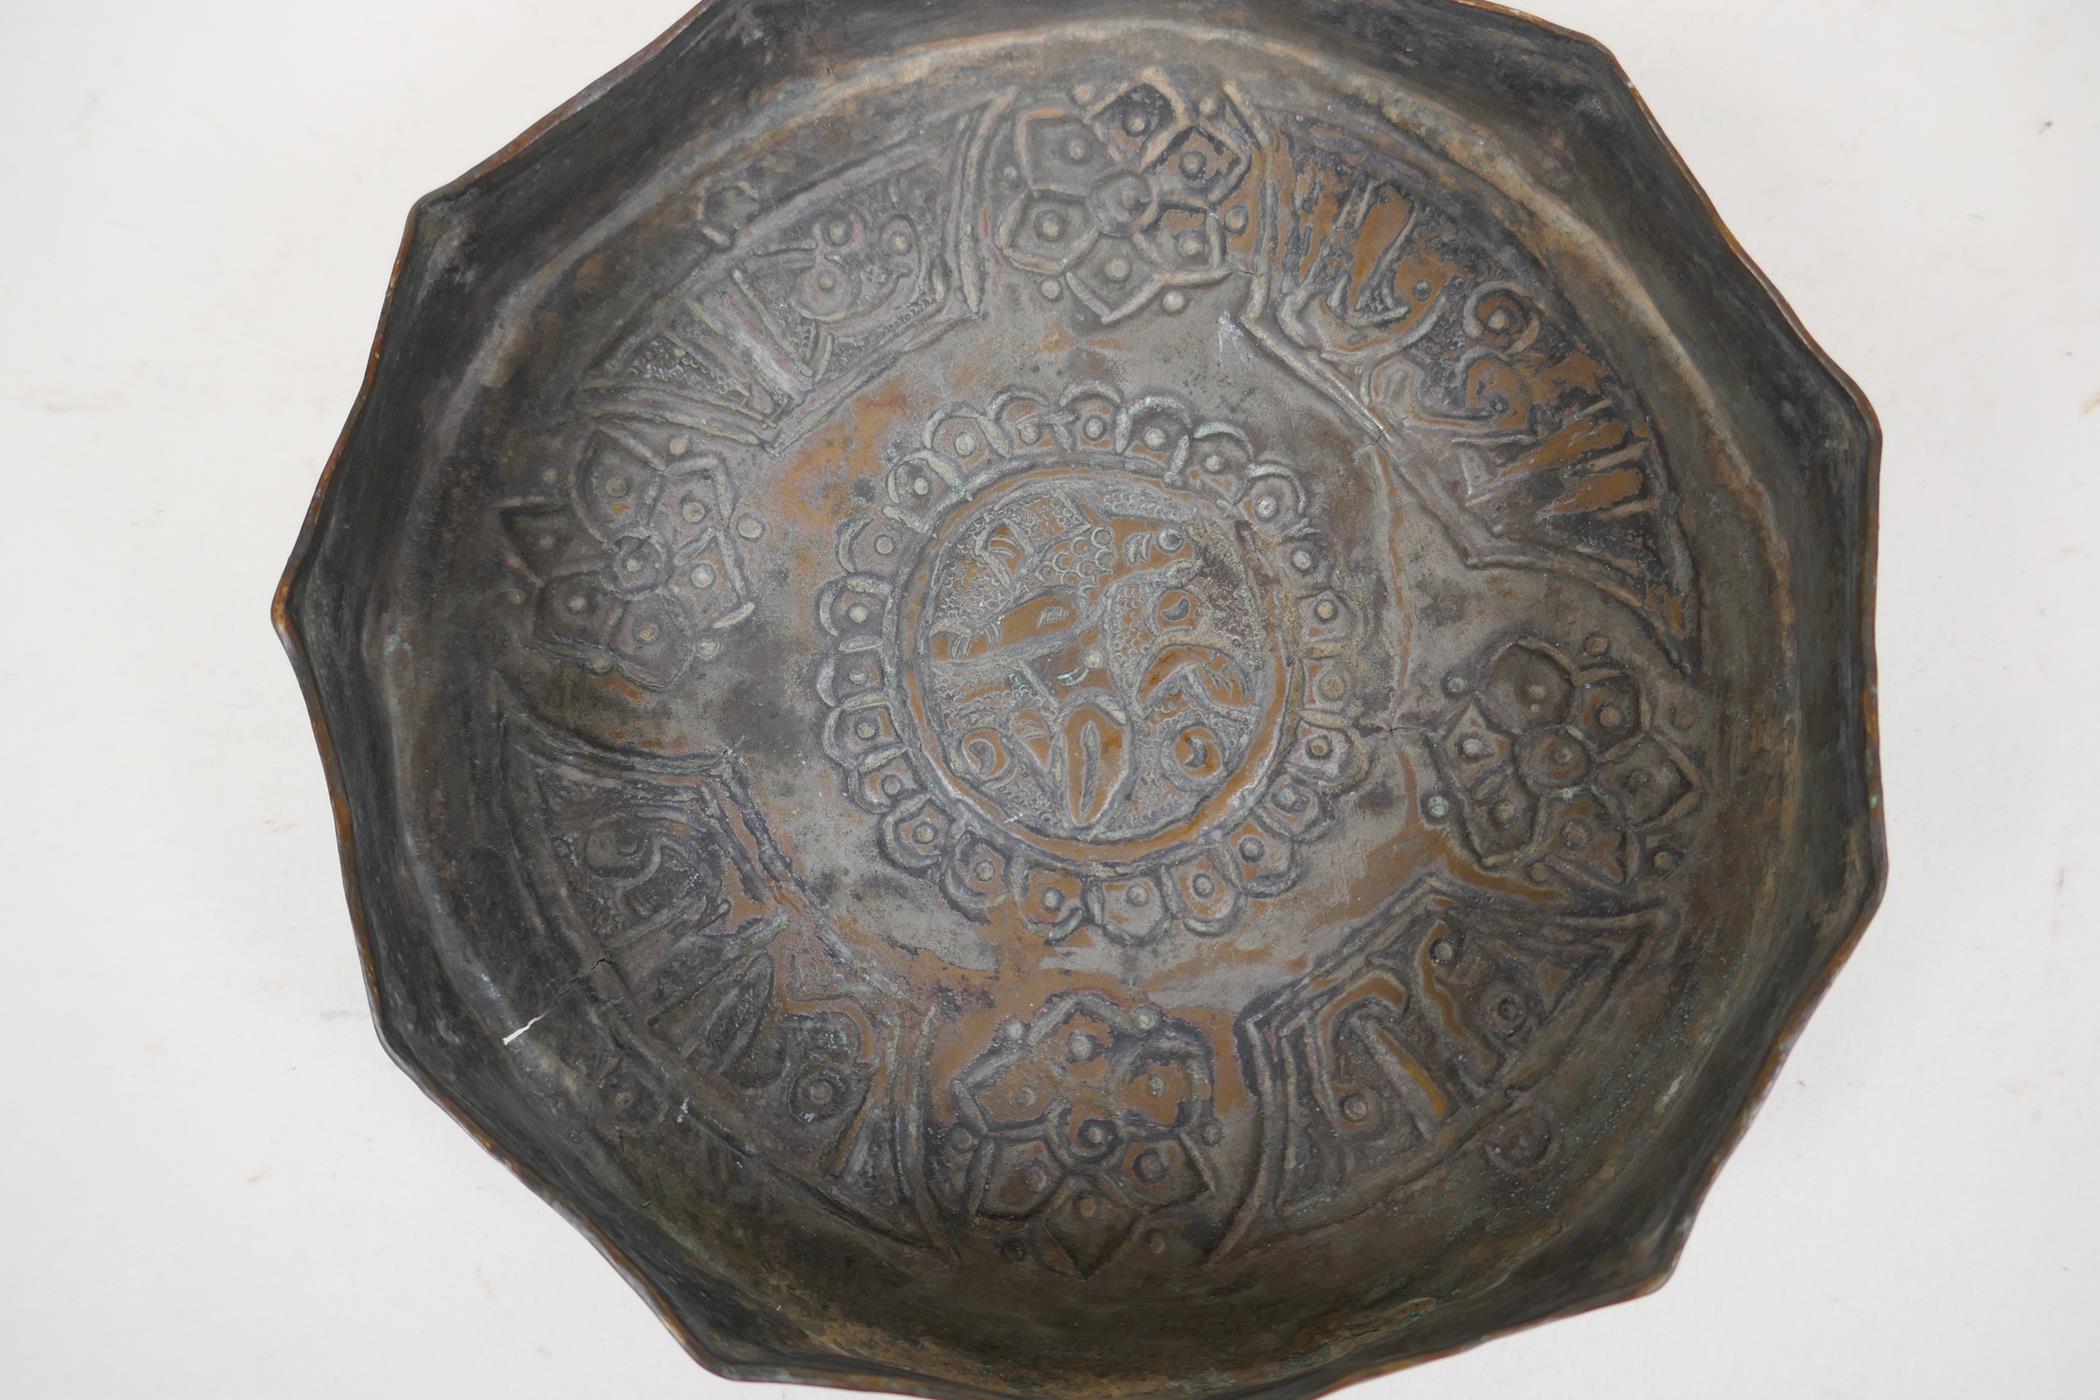 A Persian metal shallow bowl with repousse embossed decoration, 6" diameter - Image 3 of 4